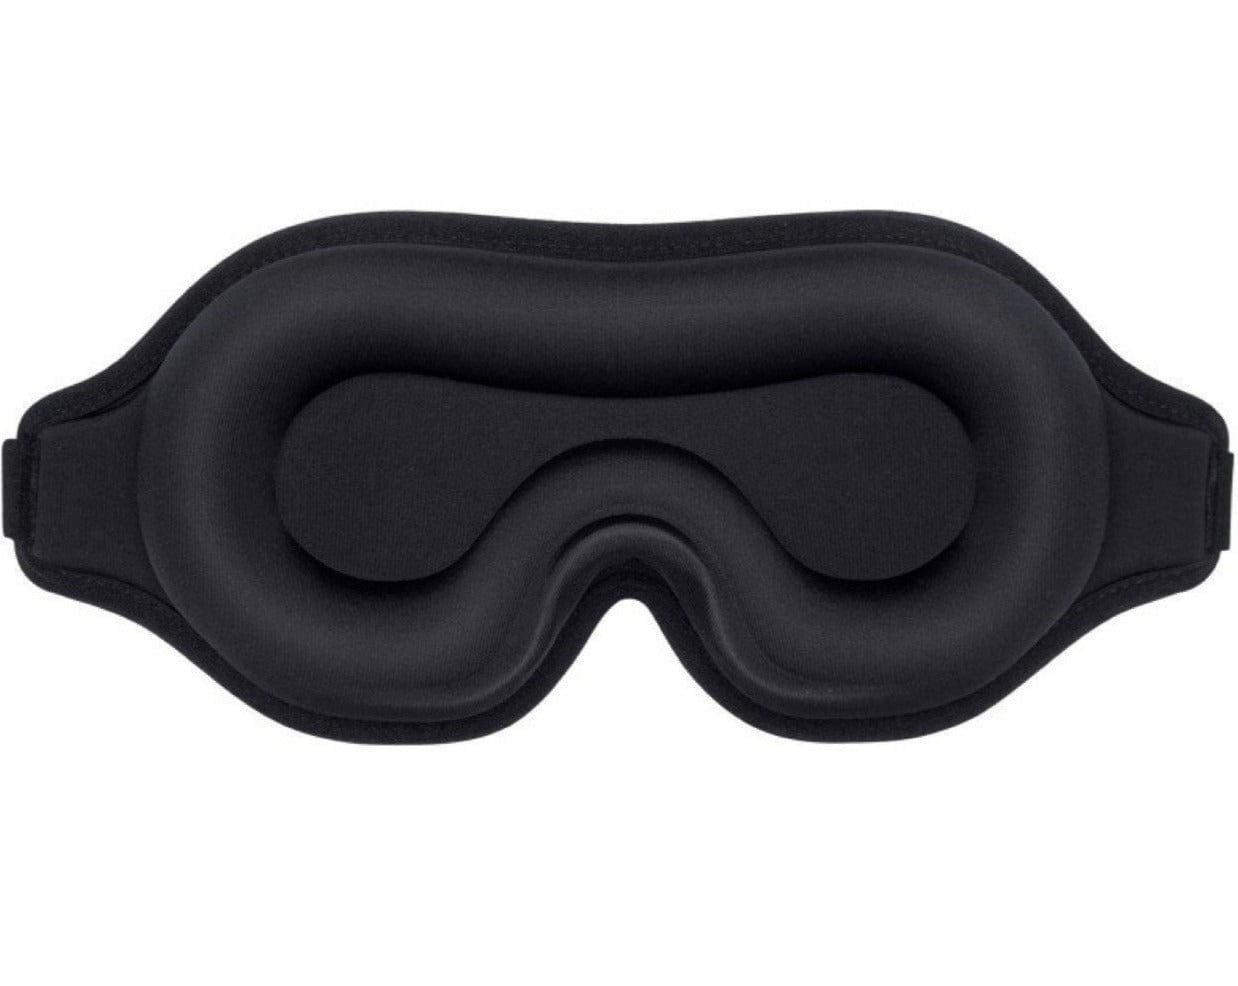 Cozynight Weighted Sleep Mask-Sleep Eye Mask for Sleeping-Eye Cover That  Blocks Out Light to Help Relaxation and Night Sleep-Comfortable Blackout